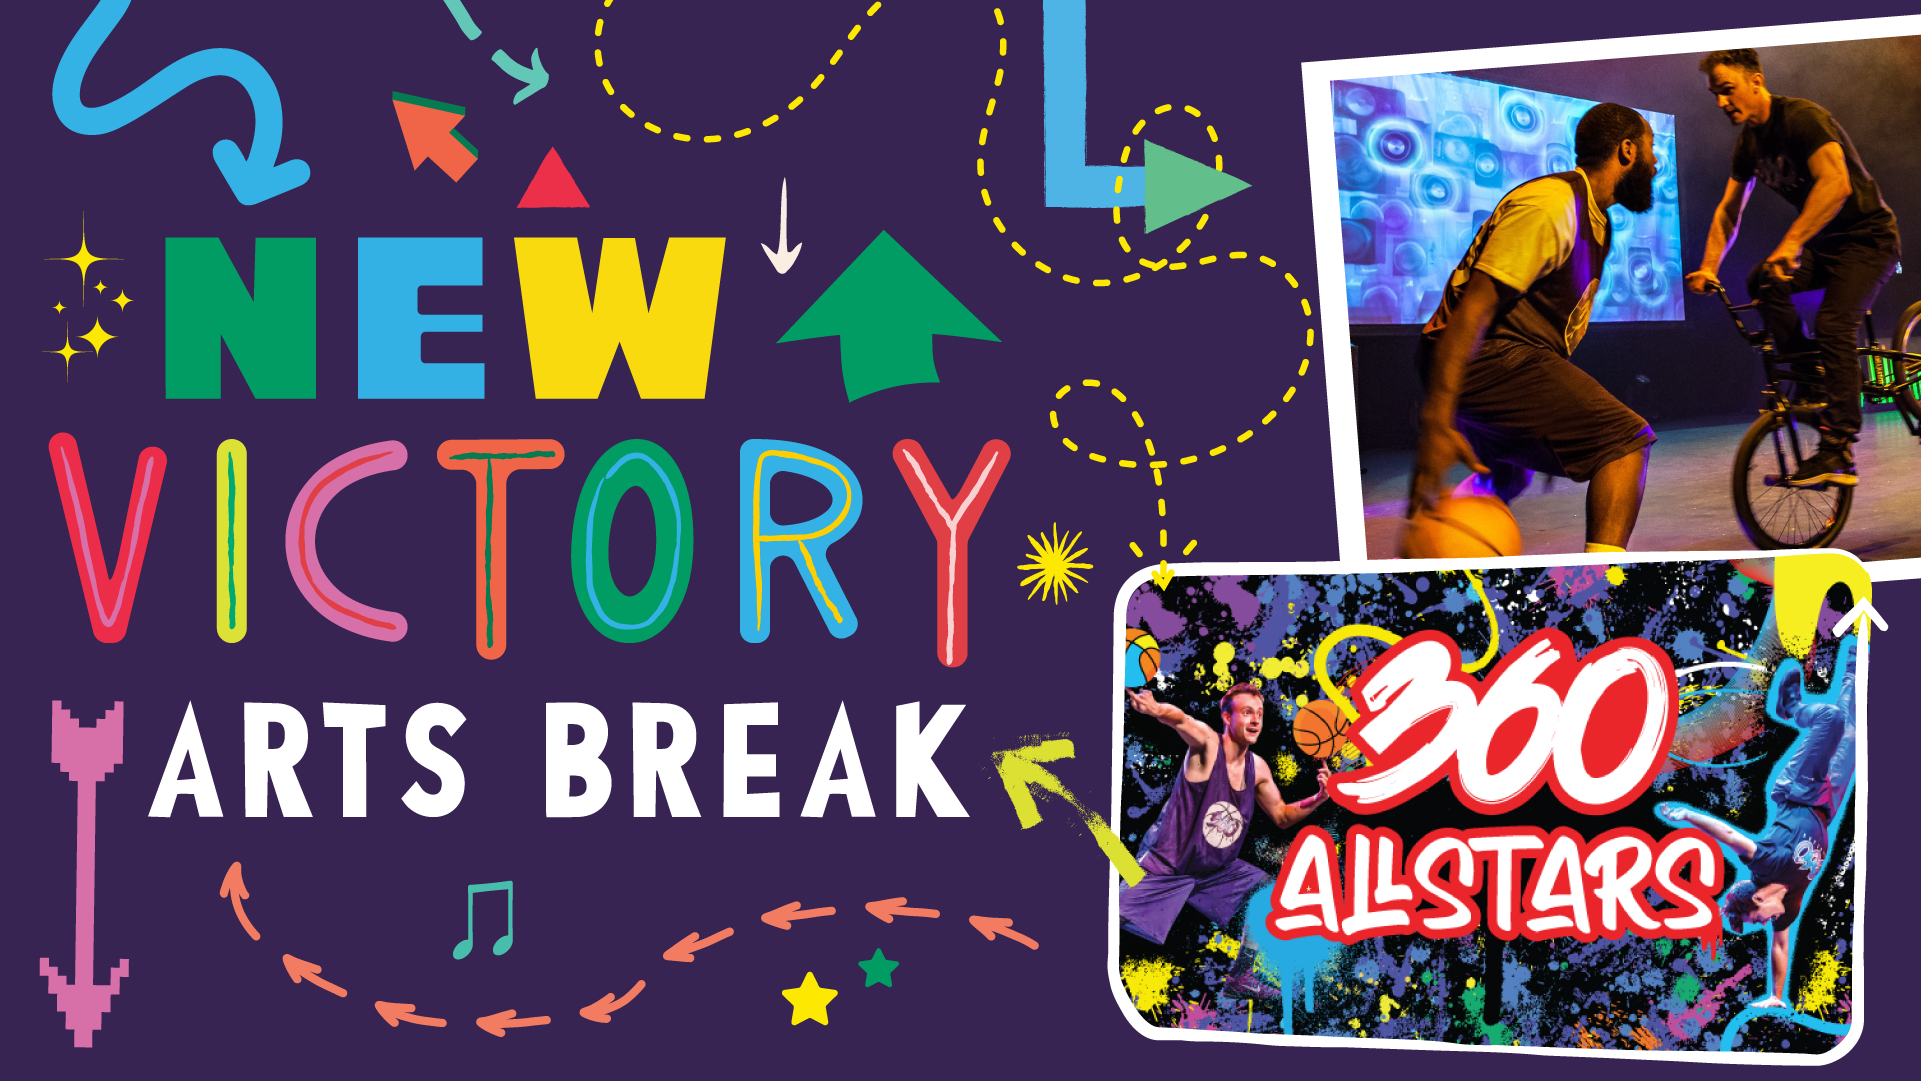 Illustrated title graphic with colorful arrows and a photo of a BMX rider and a man dribbling a basketball. The title reads “New Victory Arts Break: 360 ALLSTARS” with the latter portion in a rectangle styled with paint splatters and the title in white and red evoking graffiti.